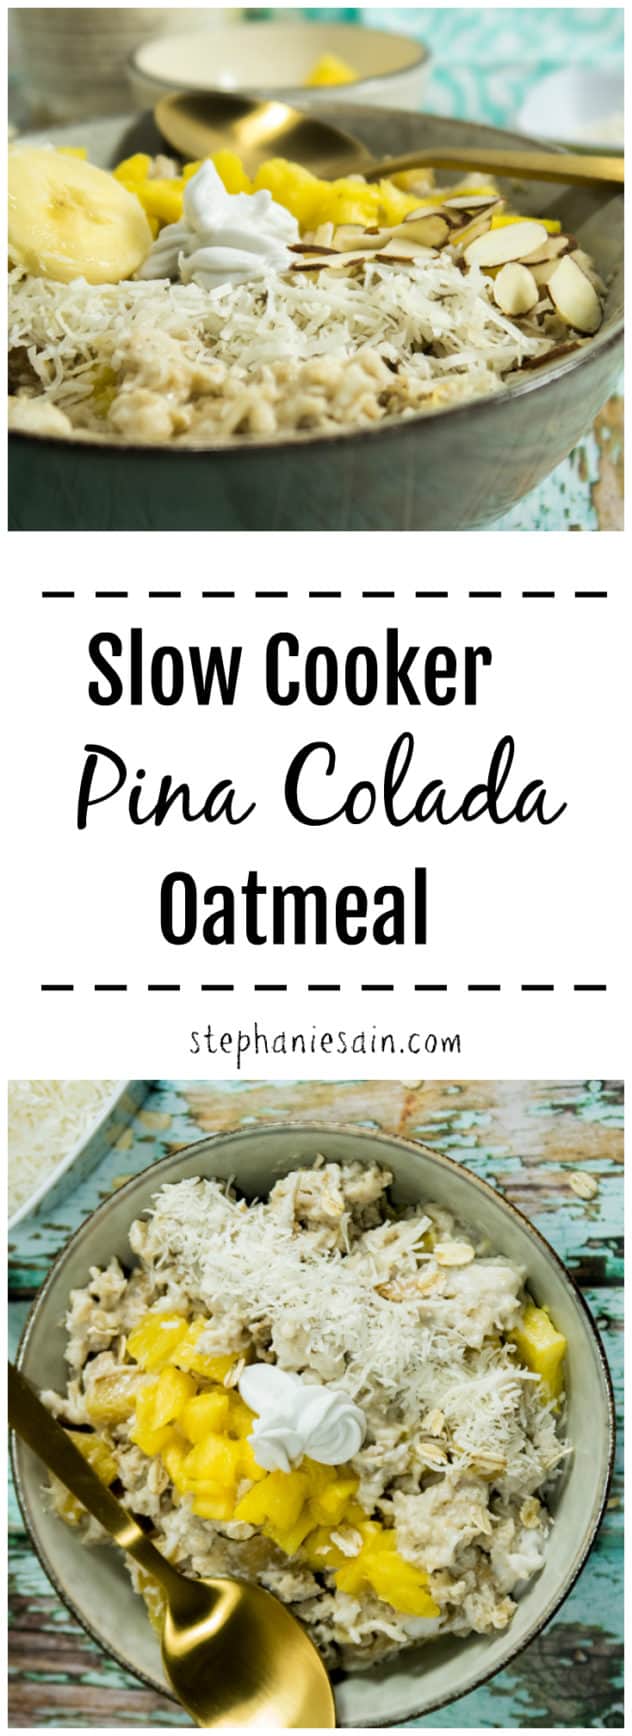 Slow Cooker Pina Colada Oatmeal is an easy, tasty make ahead breakfast. Bursting with tropical flavors and aroma for a great way to start your day. Vegan and Gluten Free.